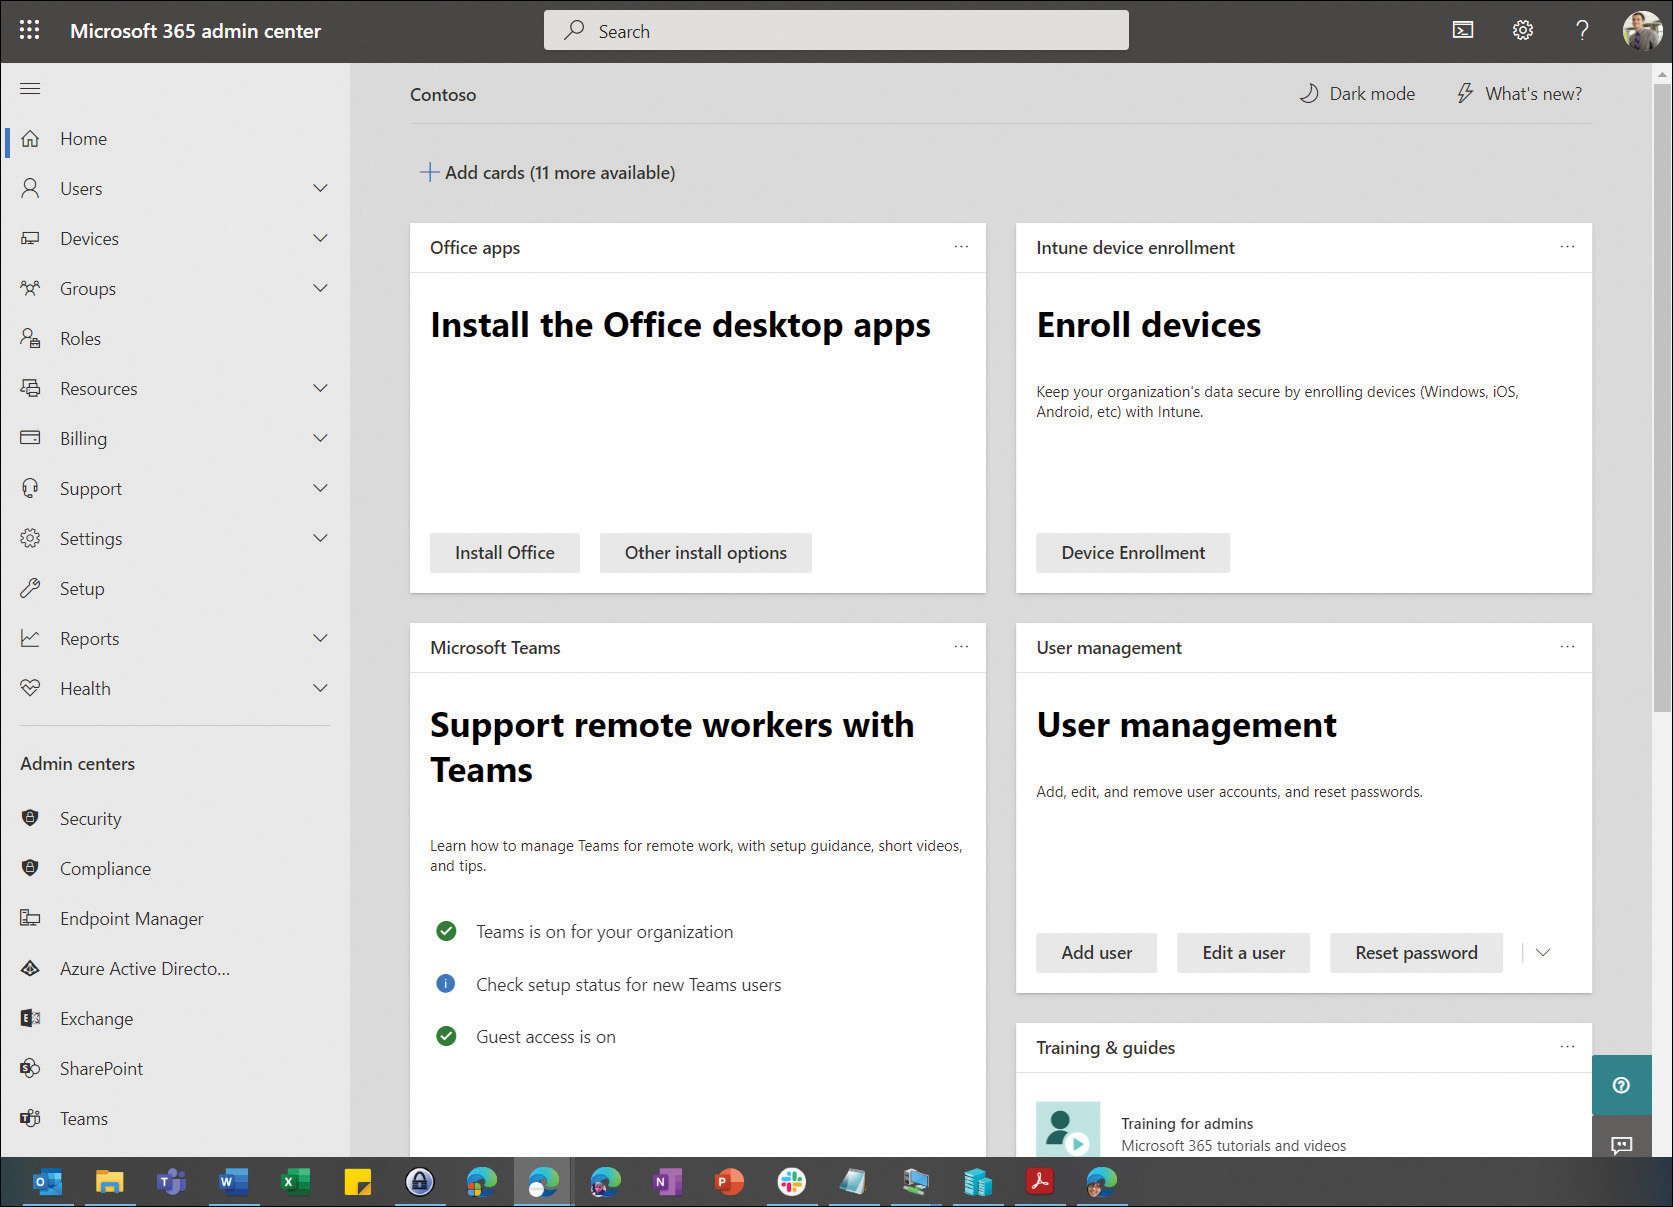 A screenshot shows the Microsoft 365 Business Admin portal with a list of items on the left, including Home, Users, Devices, and Groups. In the central pane are several rectangles with links to User Management, Enroll Devices, Azure Active Directory, and Billing.